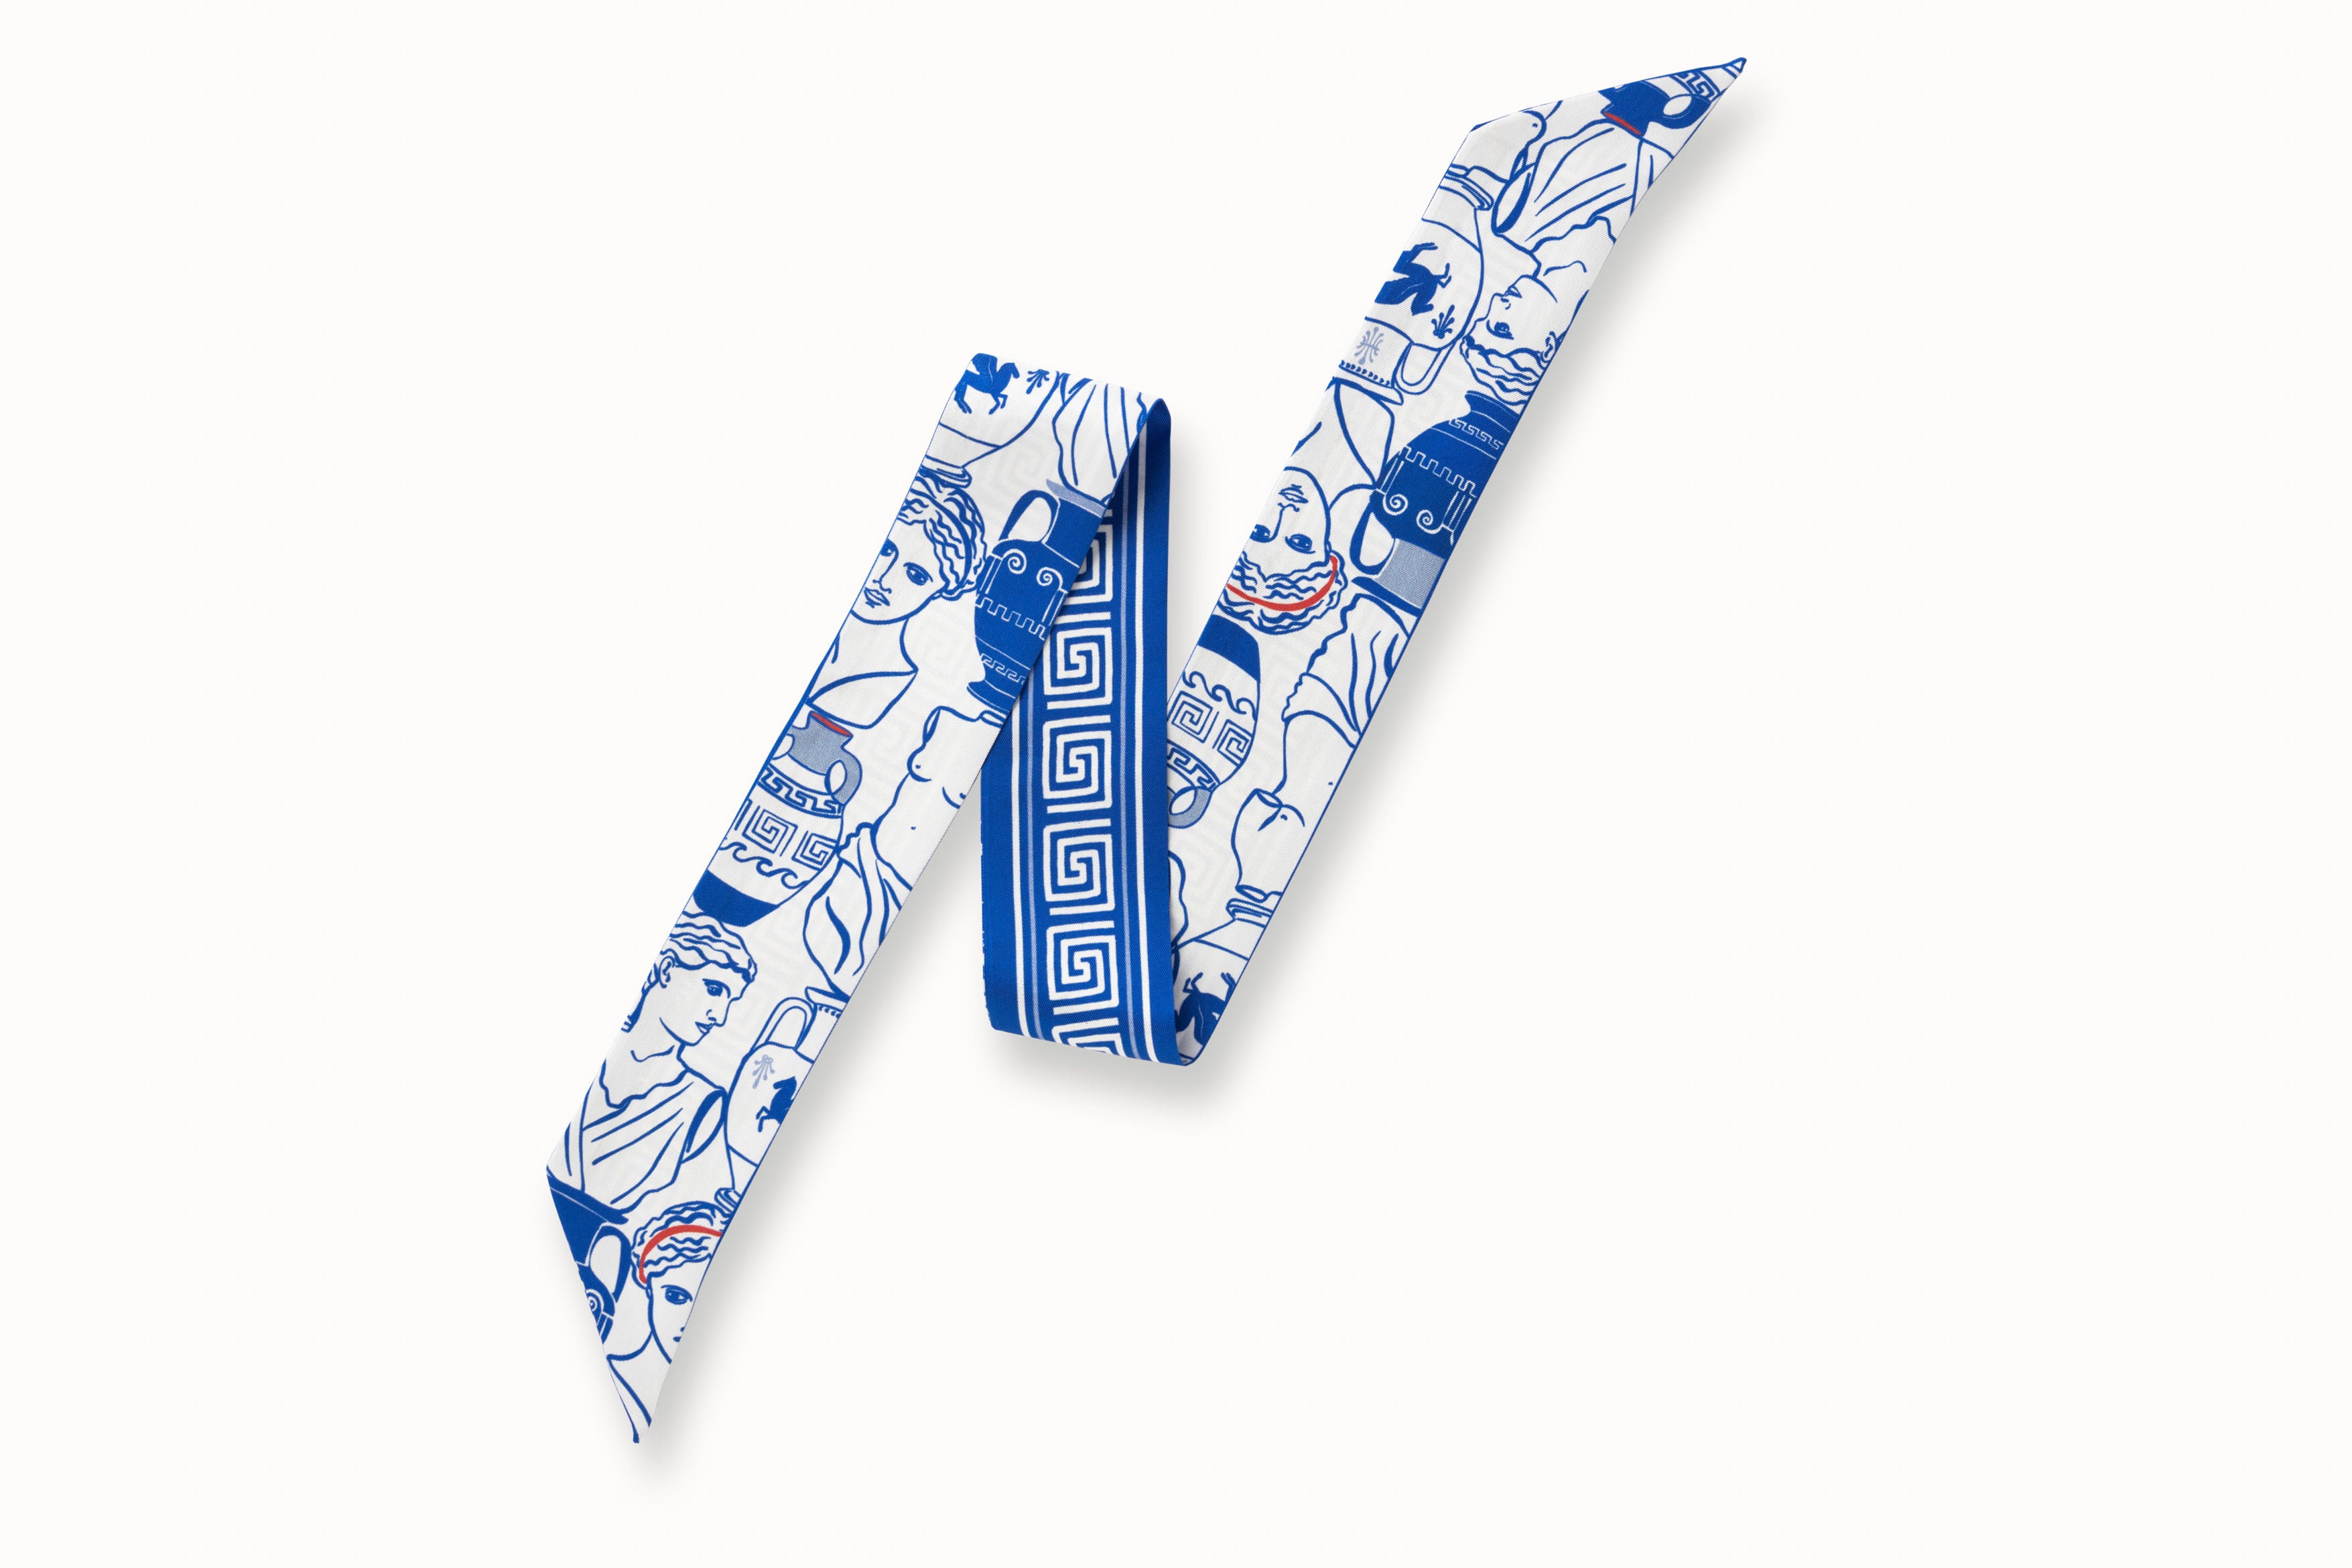 Flatlay image of 100% silk ribbon style scarf, 2” wide by 32” long, folded into a zig zag shape so both sides of the scarf are seen. Design features illustrations of Greek goddess busts and urns in a bright Aegean blue on a white background. The opposite side of the scarf features a white Greek key design motif on a bright blue background.